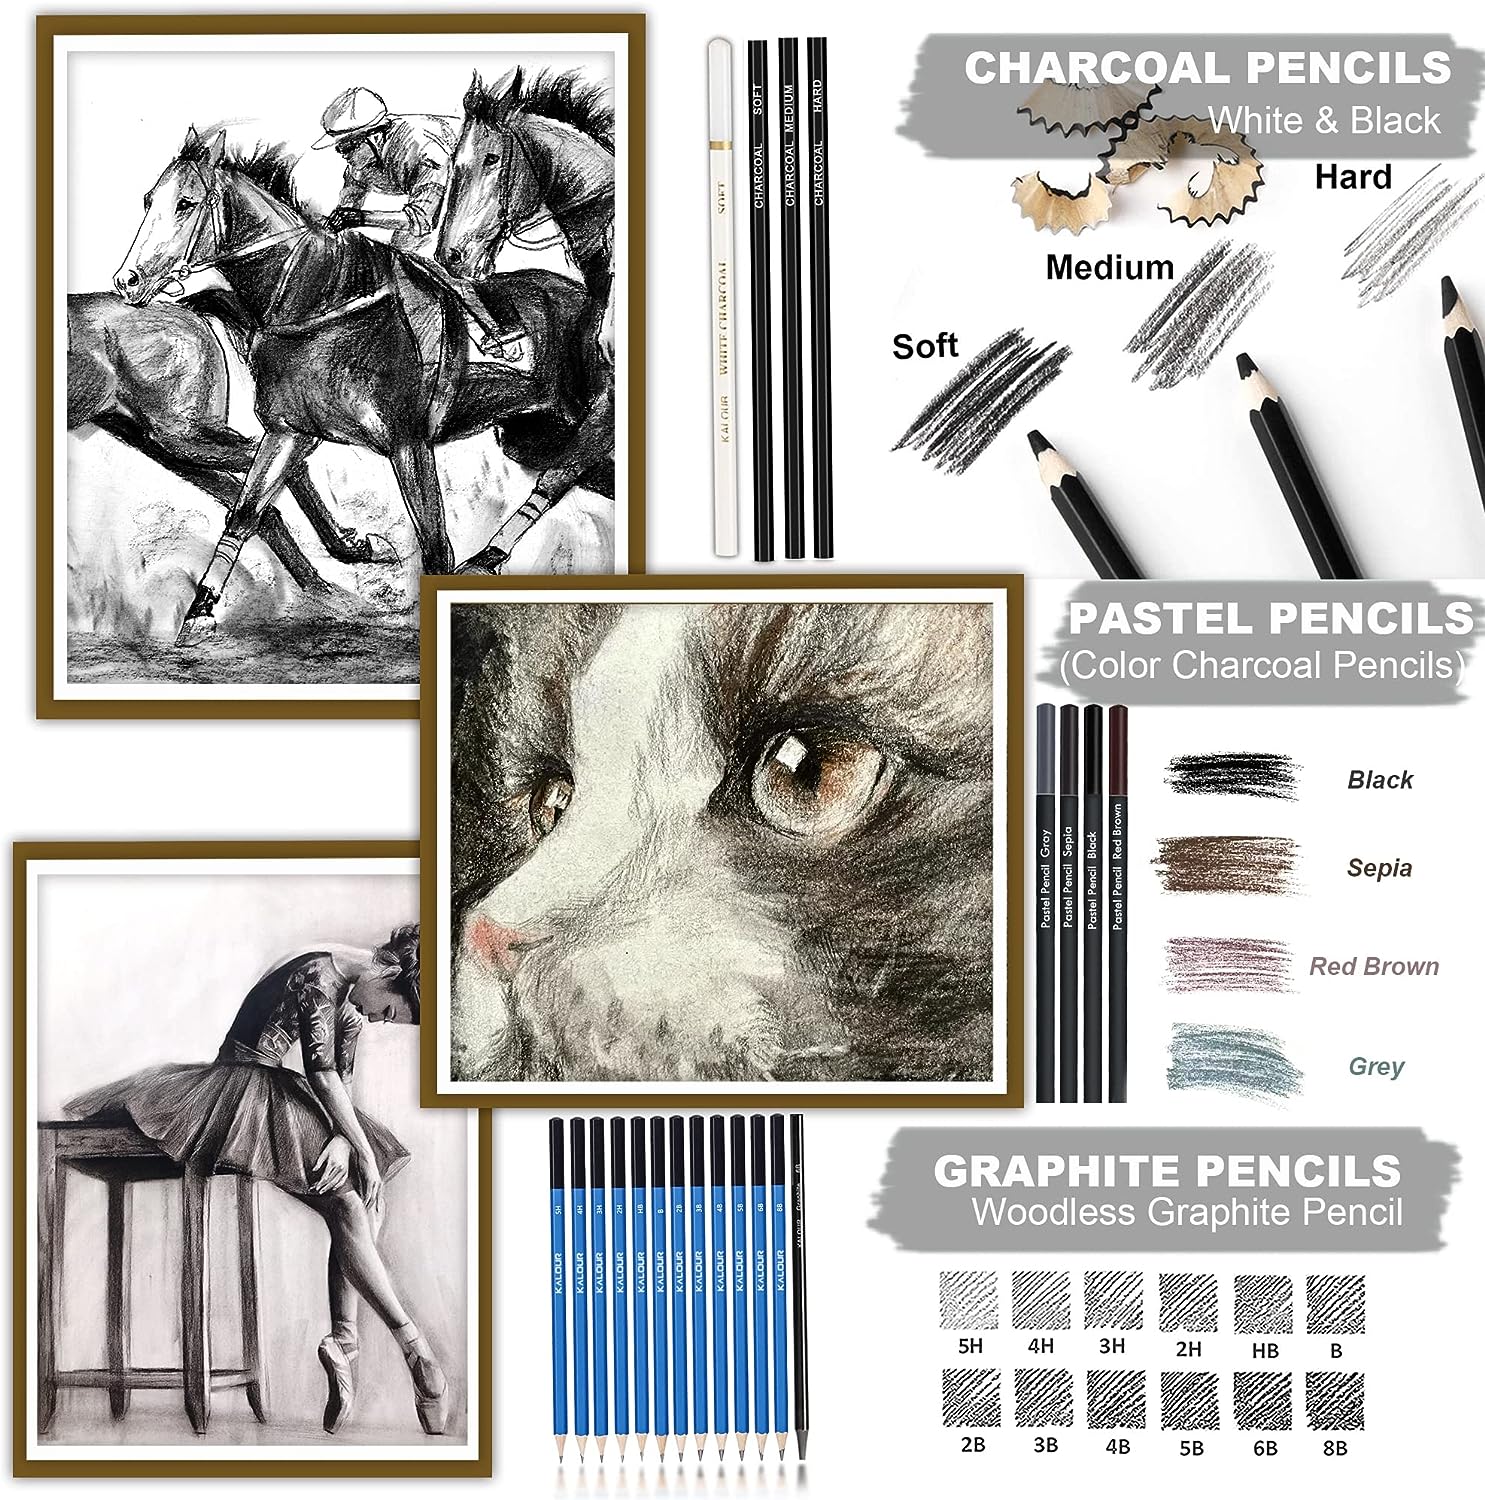 XL Drawing Set - Sketching, Graphite and Charcoal Pencils